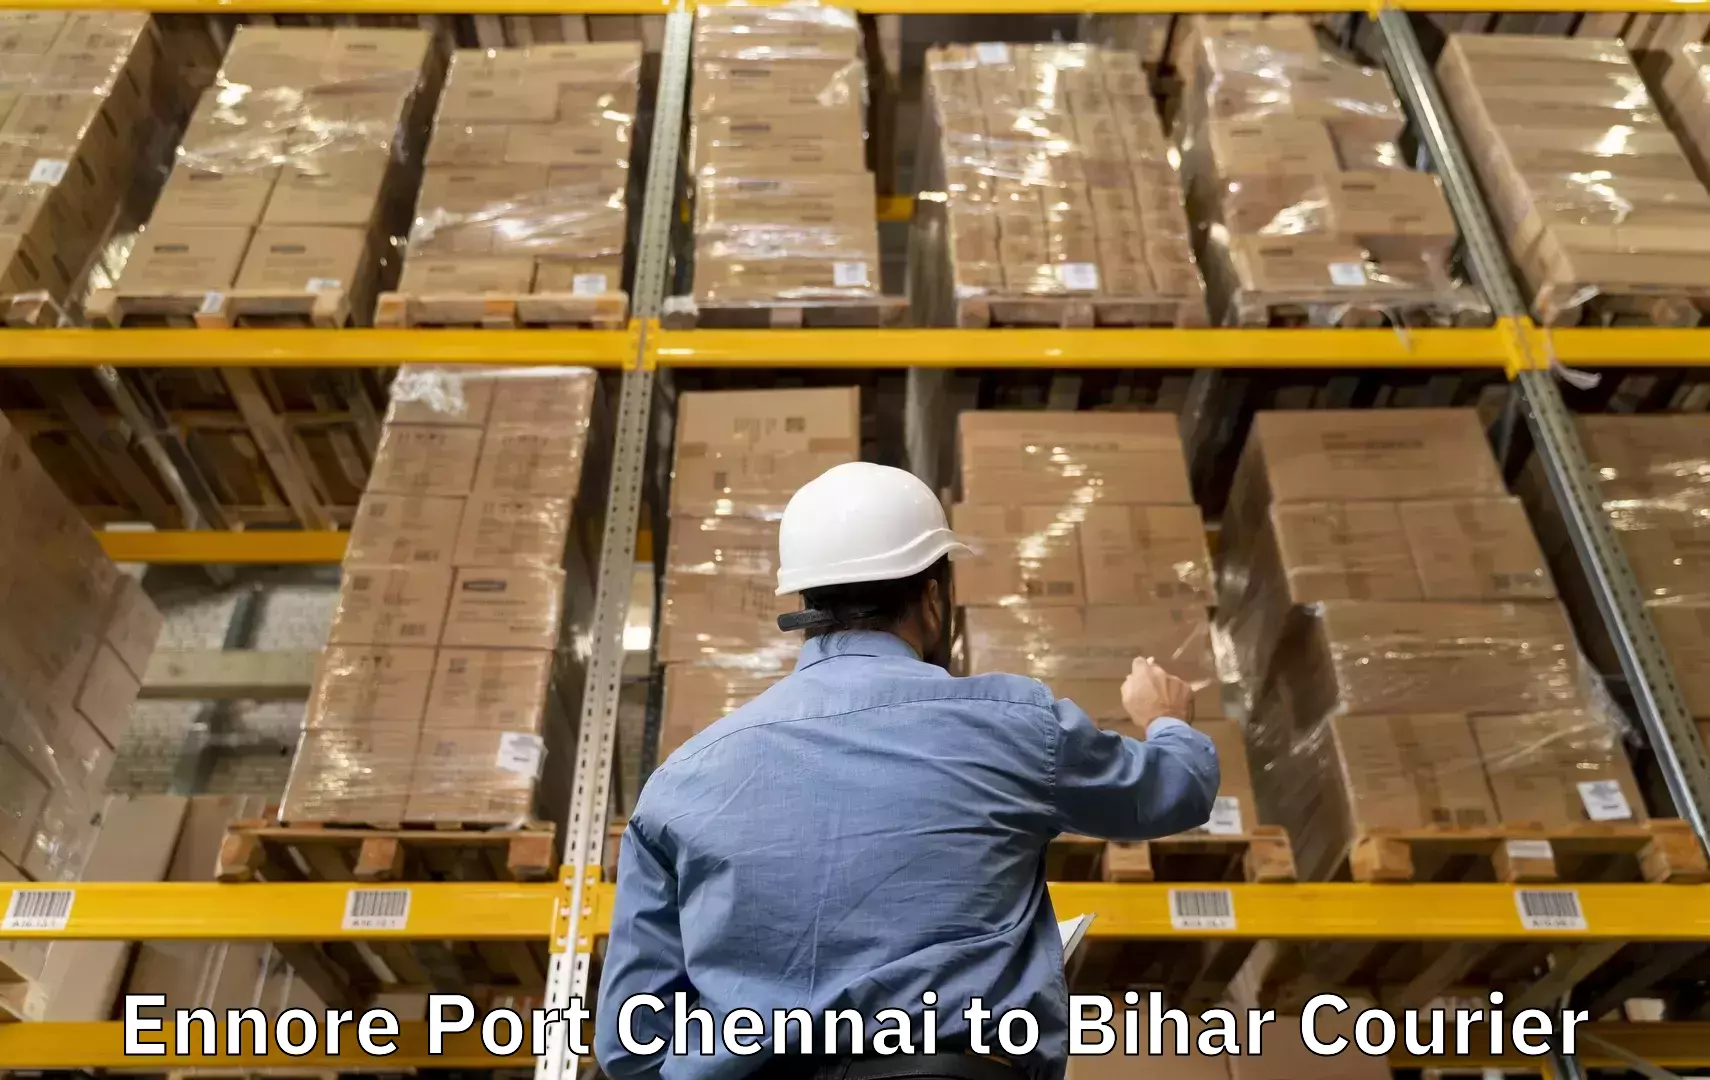 Baggage courier strategy Ennore Port Chennai to Bhorey